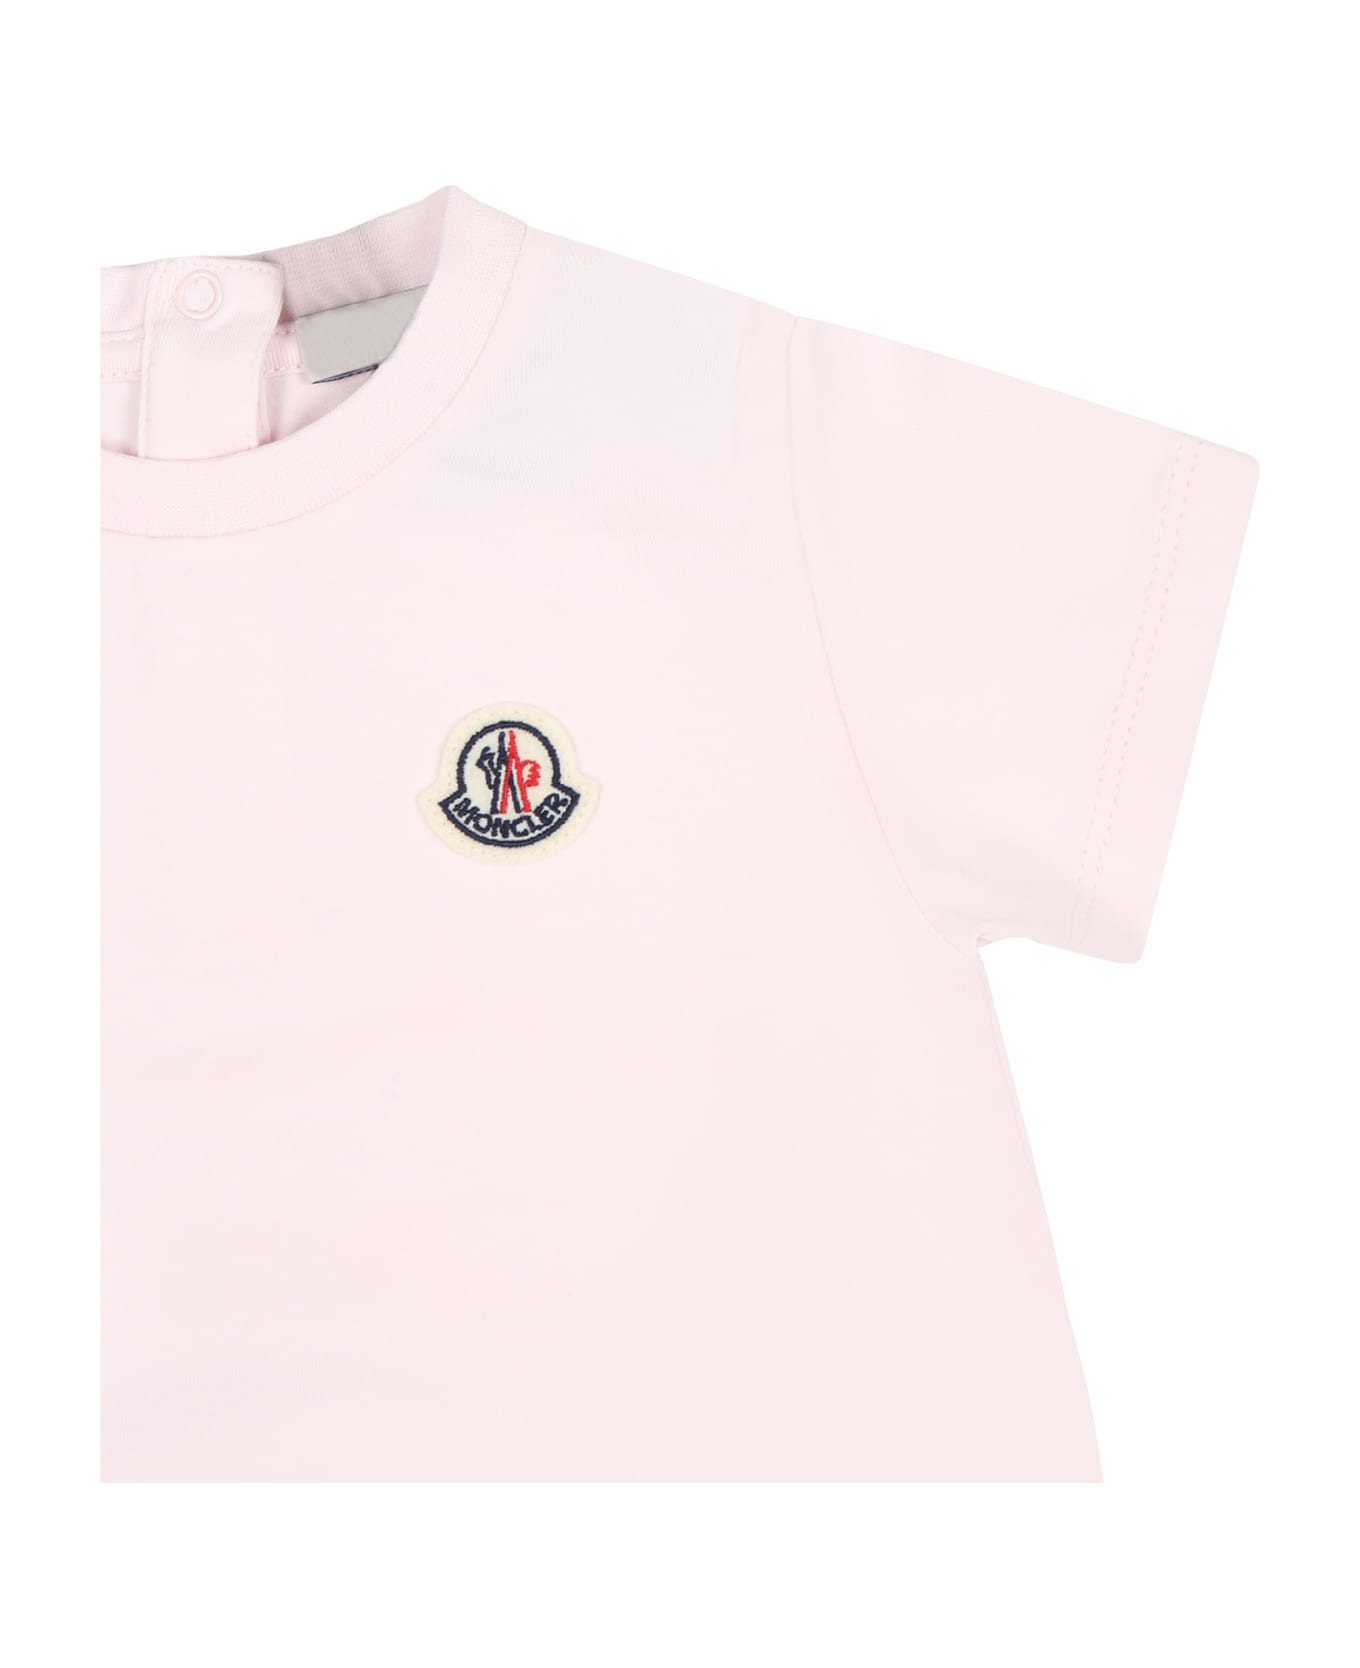 Moncler Pink Dress For Baby Girl With Logo - Pink ウェア